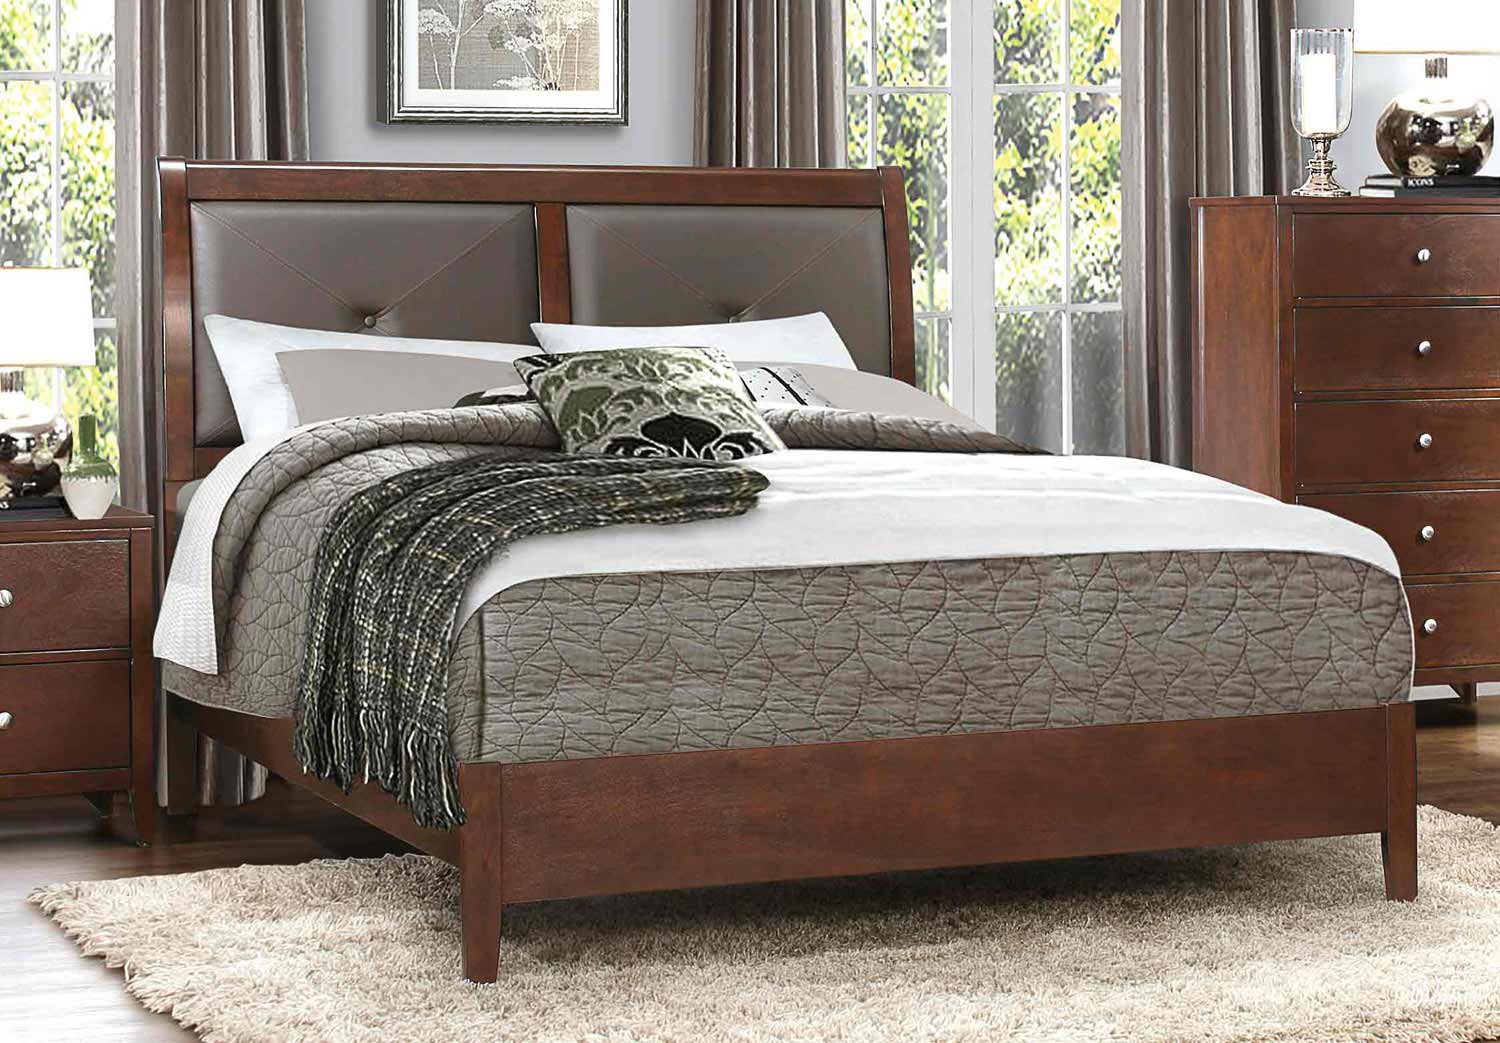 Homelegance Cullen Upholstered Bed - Brown Cherry